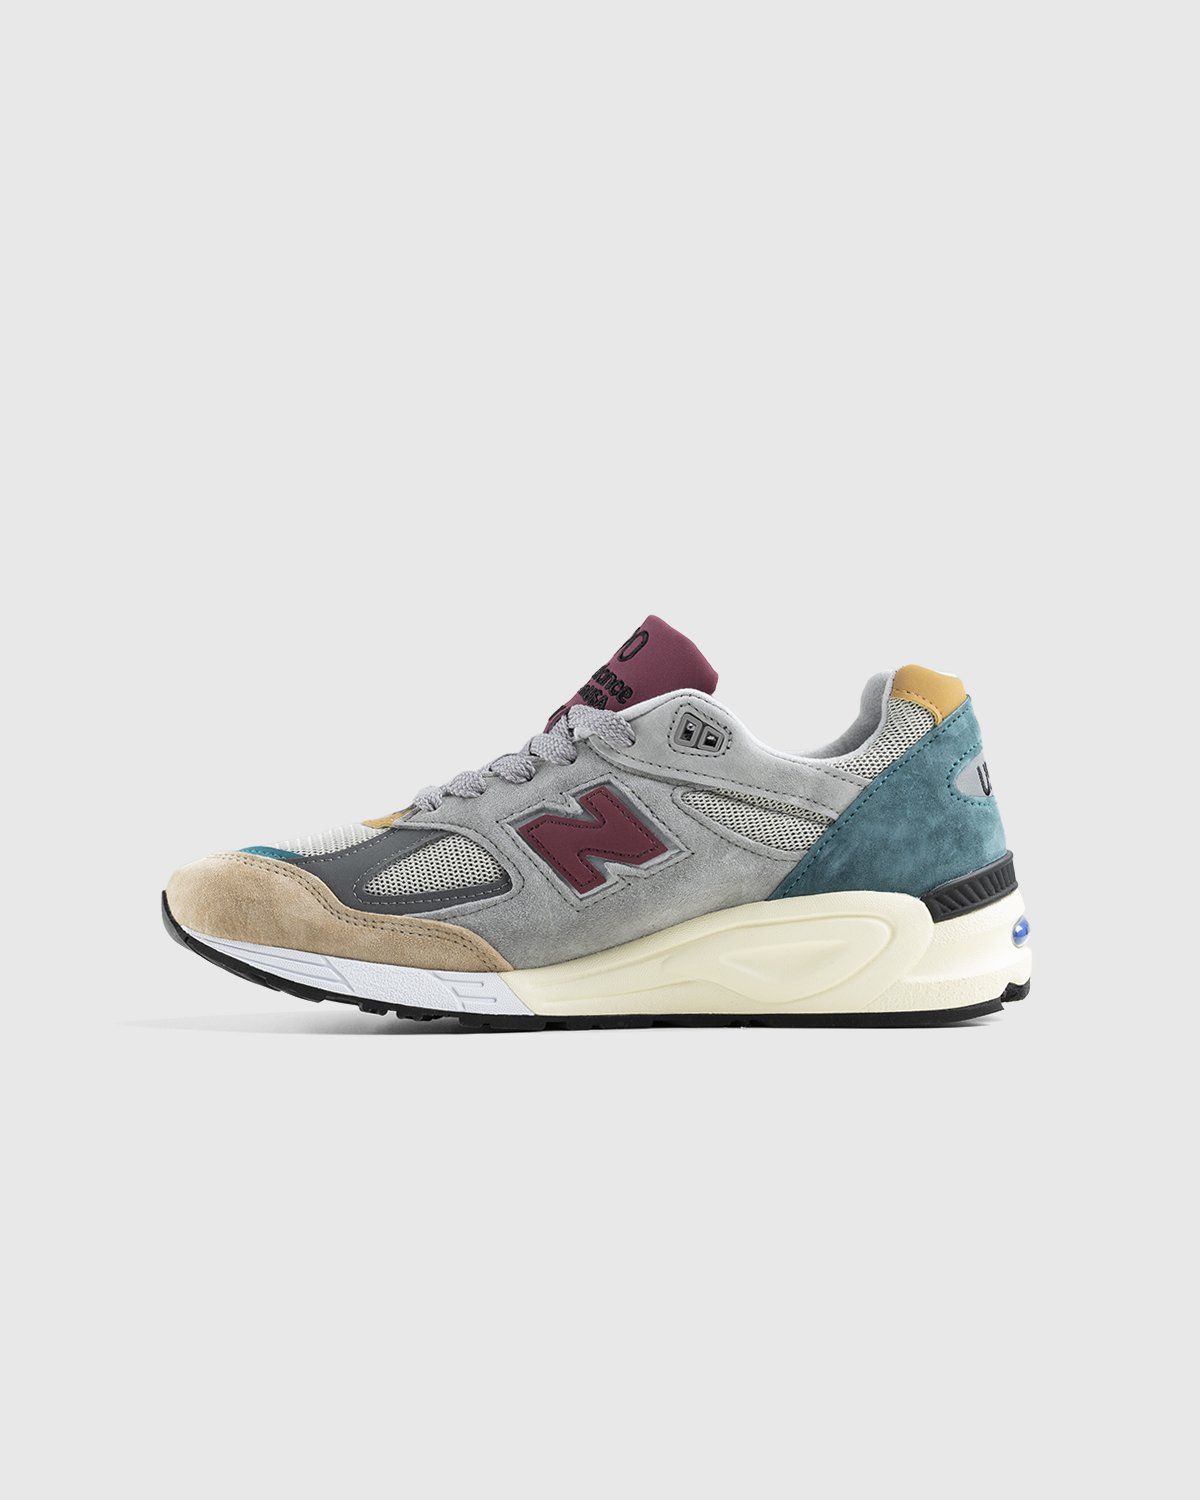 New Balance – M990CP2 Grey Multi - Low Top Sneakers - Grey - Image 2